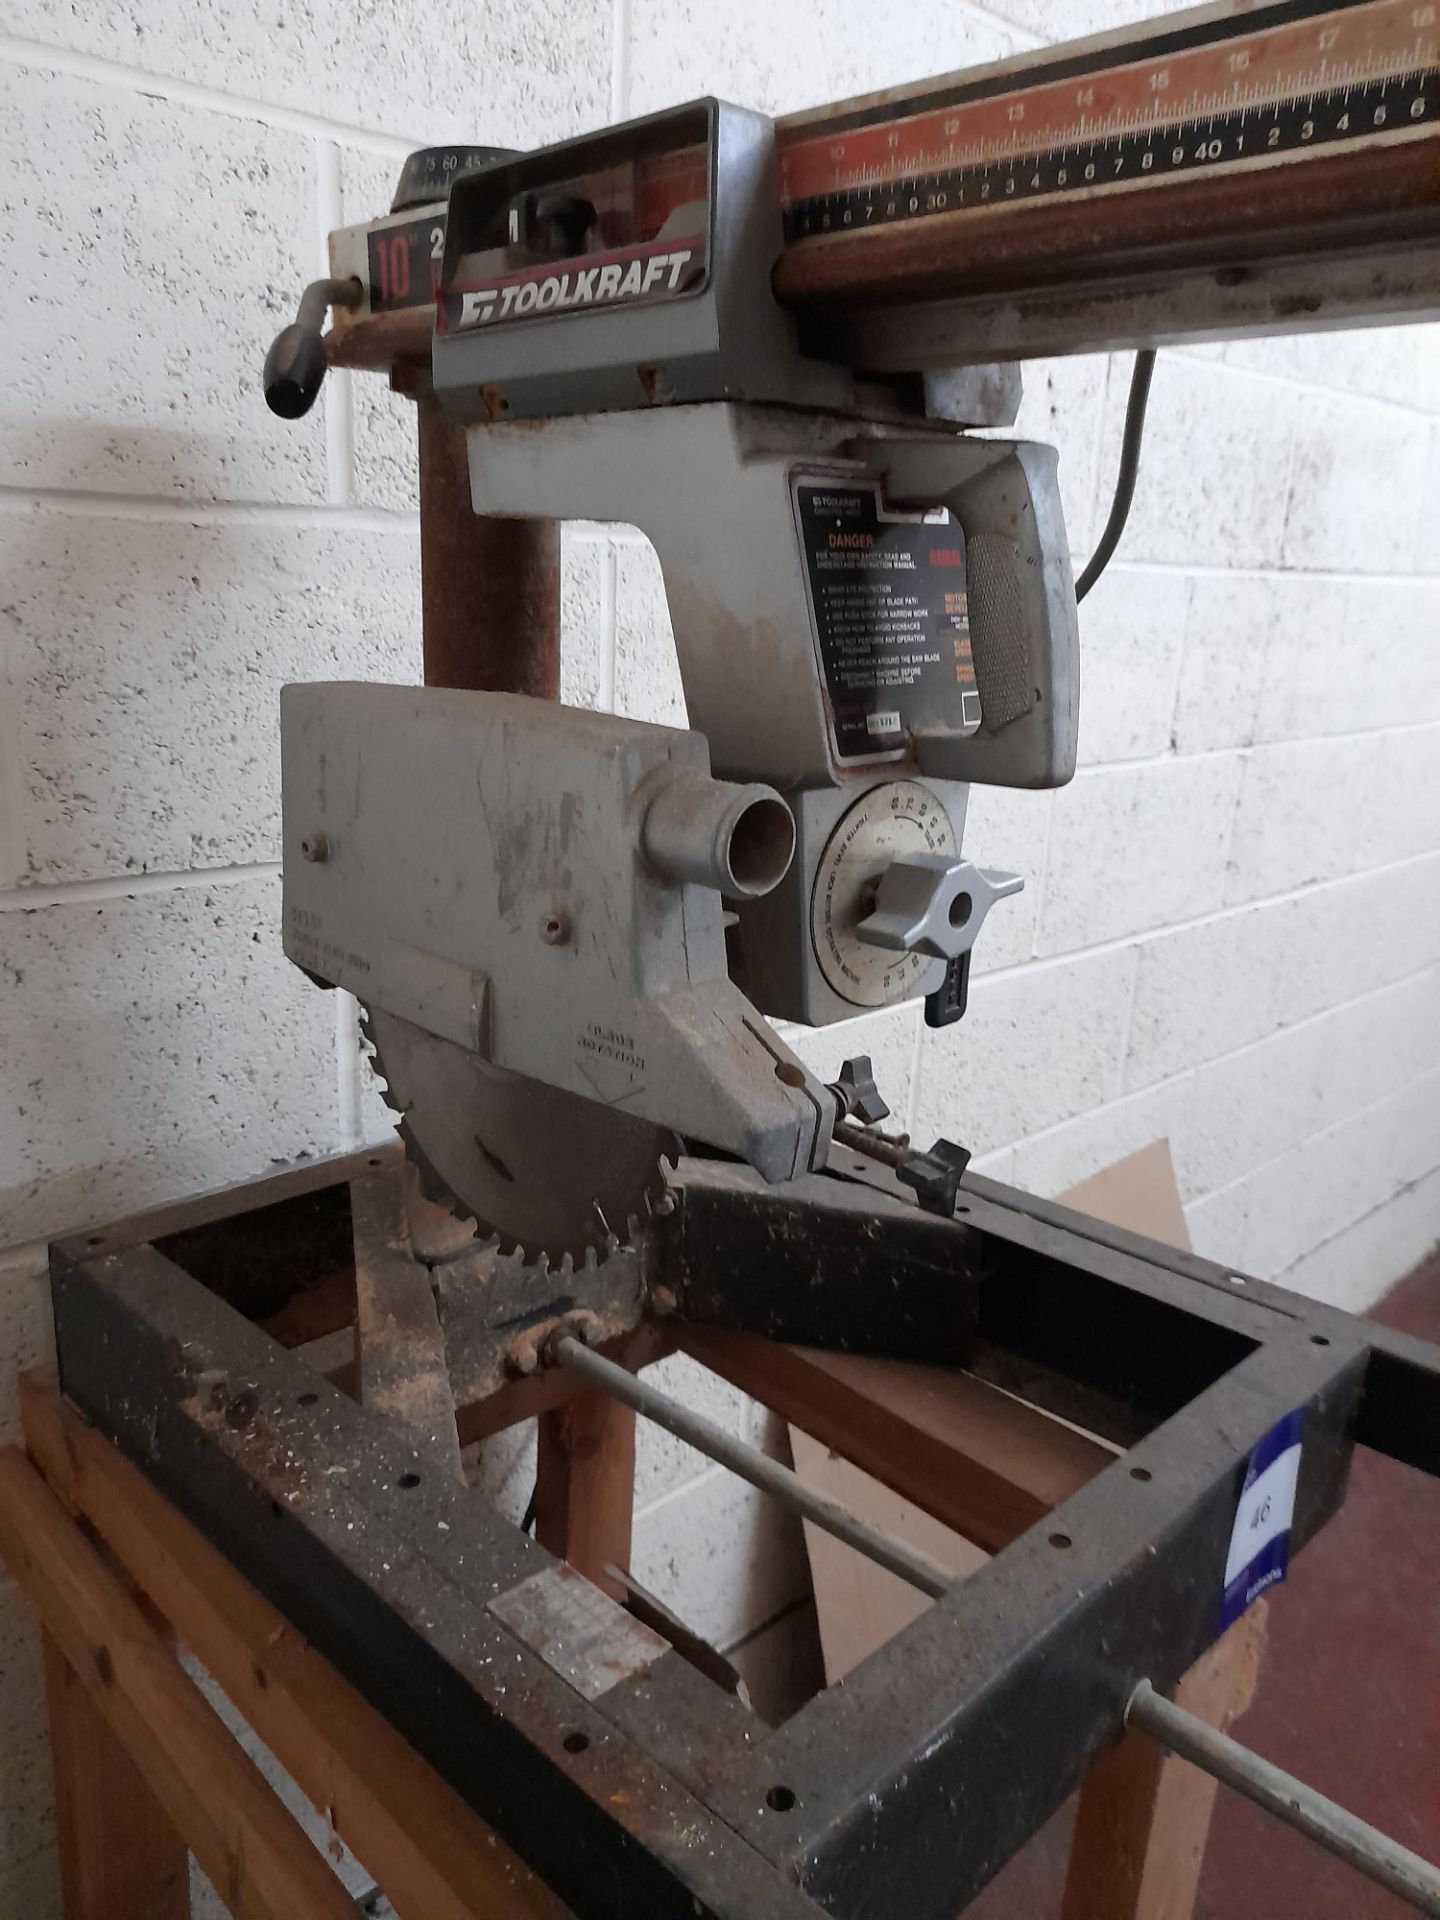 ToolKraft Model 4015 10” Radial Arm Drill, serial number 08X1718, 240v, on wooden stand - Image 6 of 6